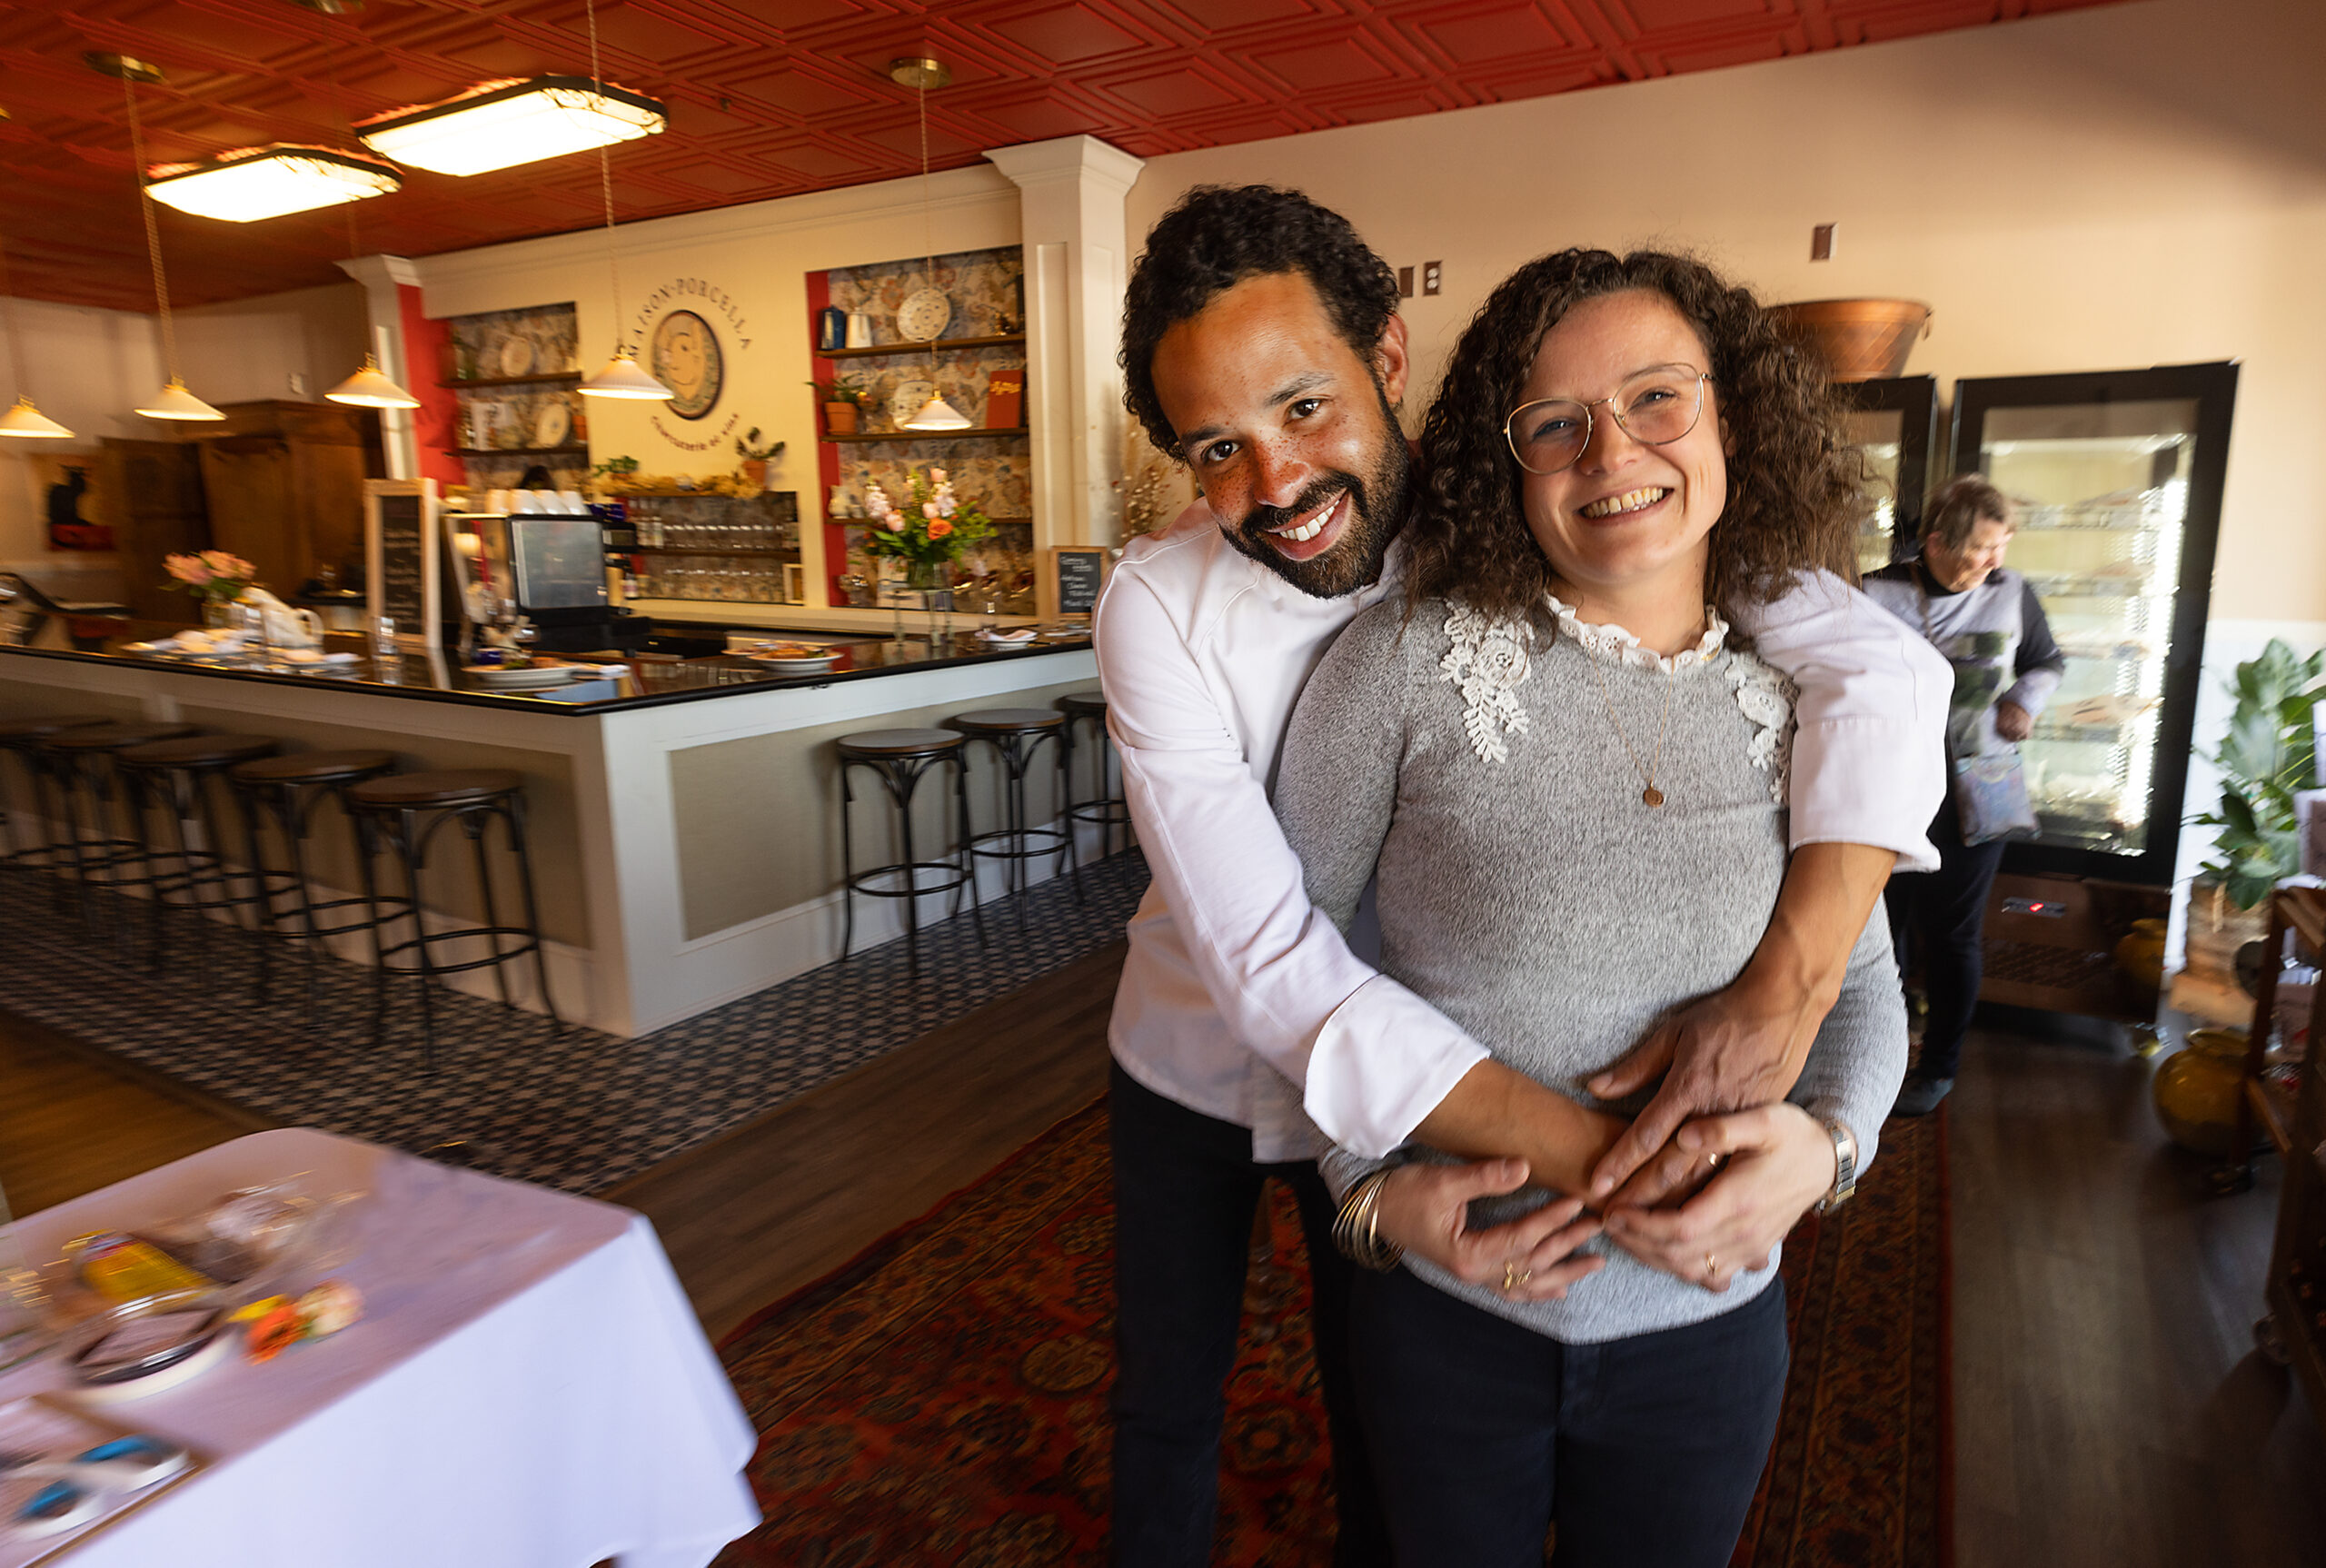 Marc-Henri and Maud Jean-Baptiste have started serving lunch along with retail sales of their house-made pates, sausages, ham, and savory pastries at Maison Porcella in Windsor April 13, 2023. (John Burgess/The Press Democrat)